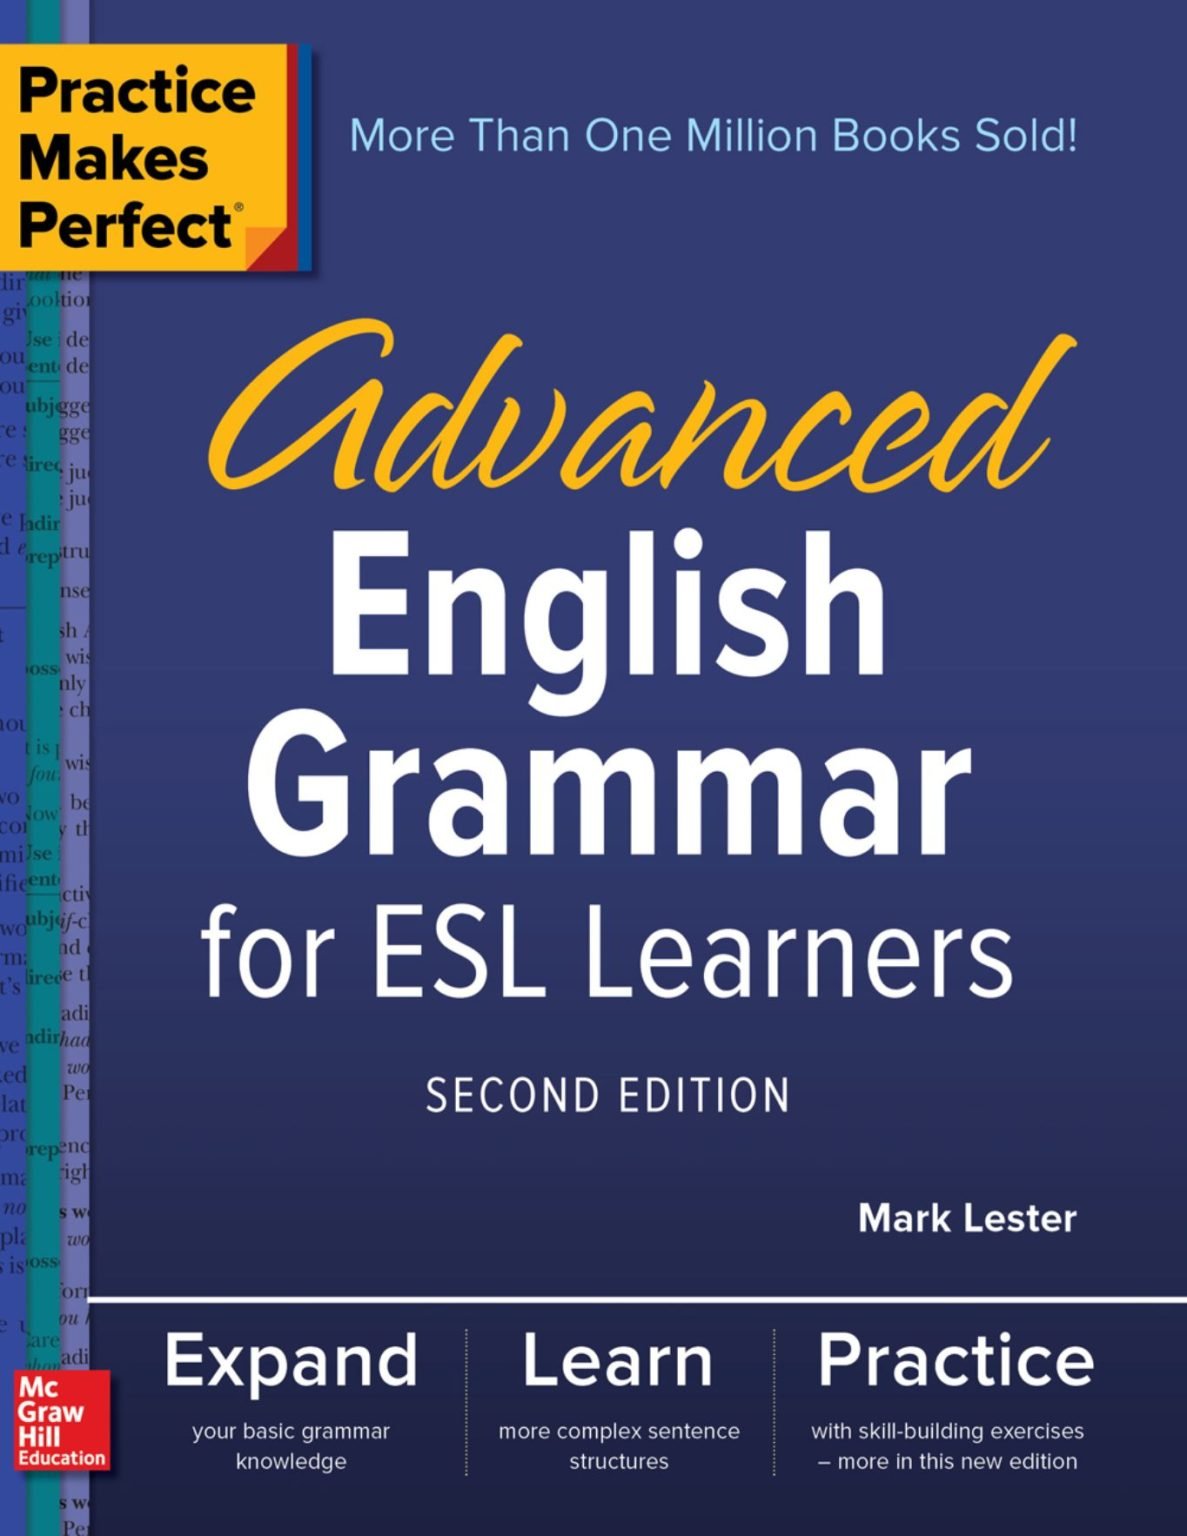 Rich Results on Google's SERP when searching for ''Advanced-English-Grammar-for-ESL-Learners-Book''